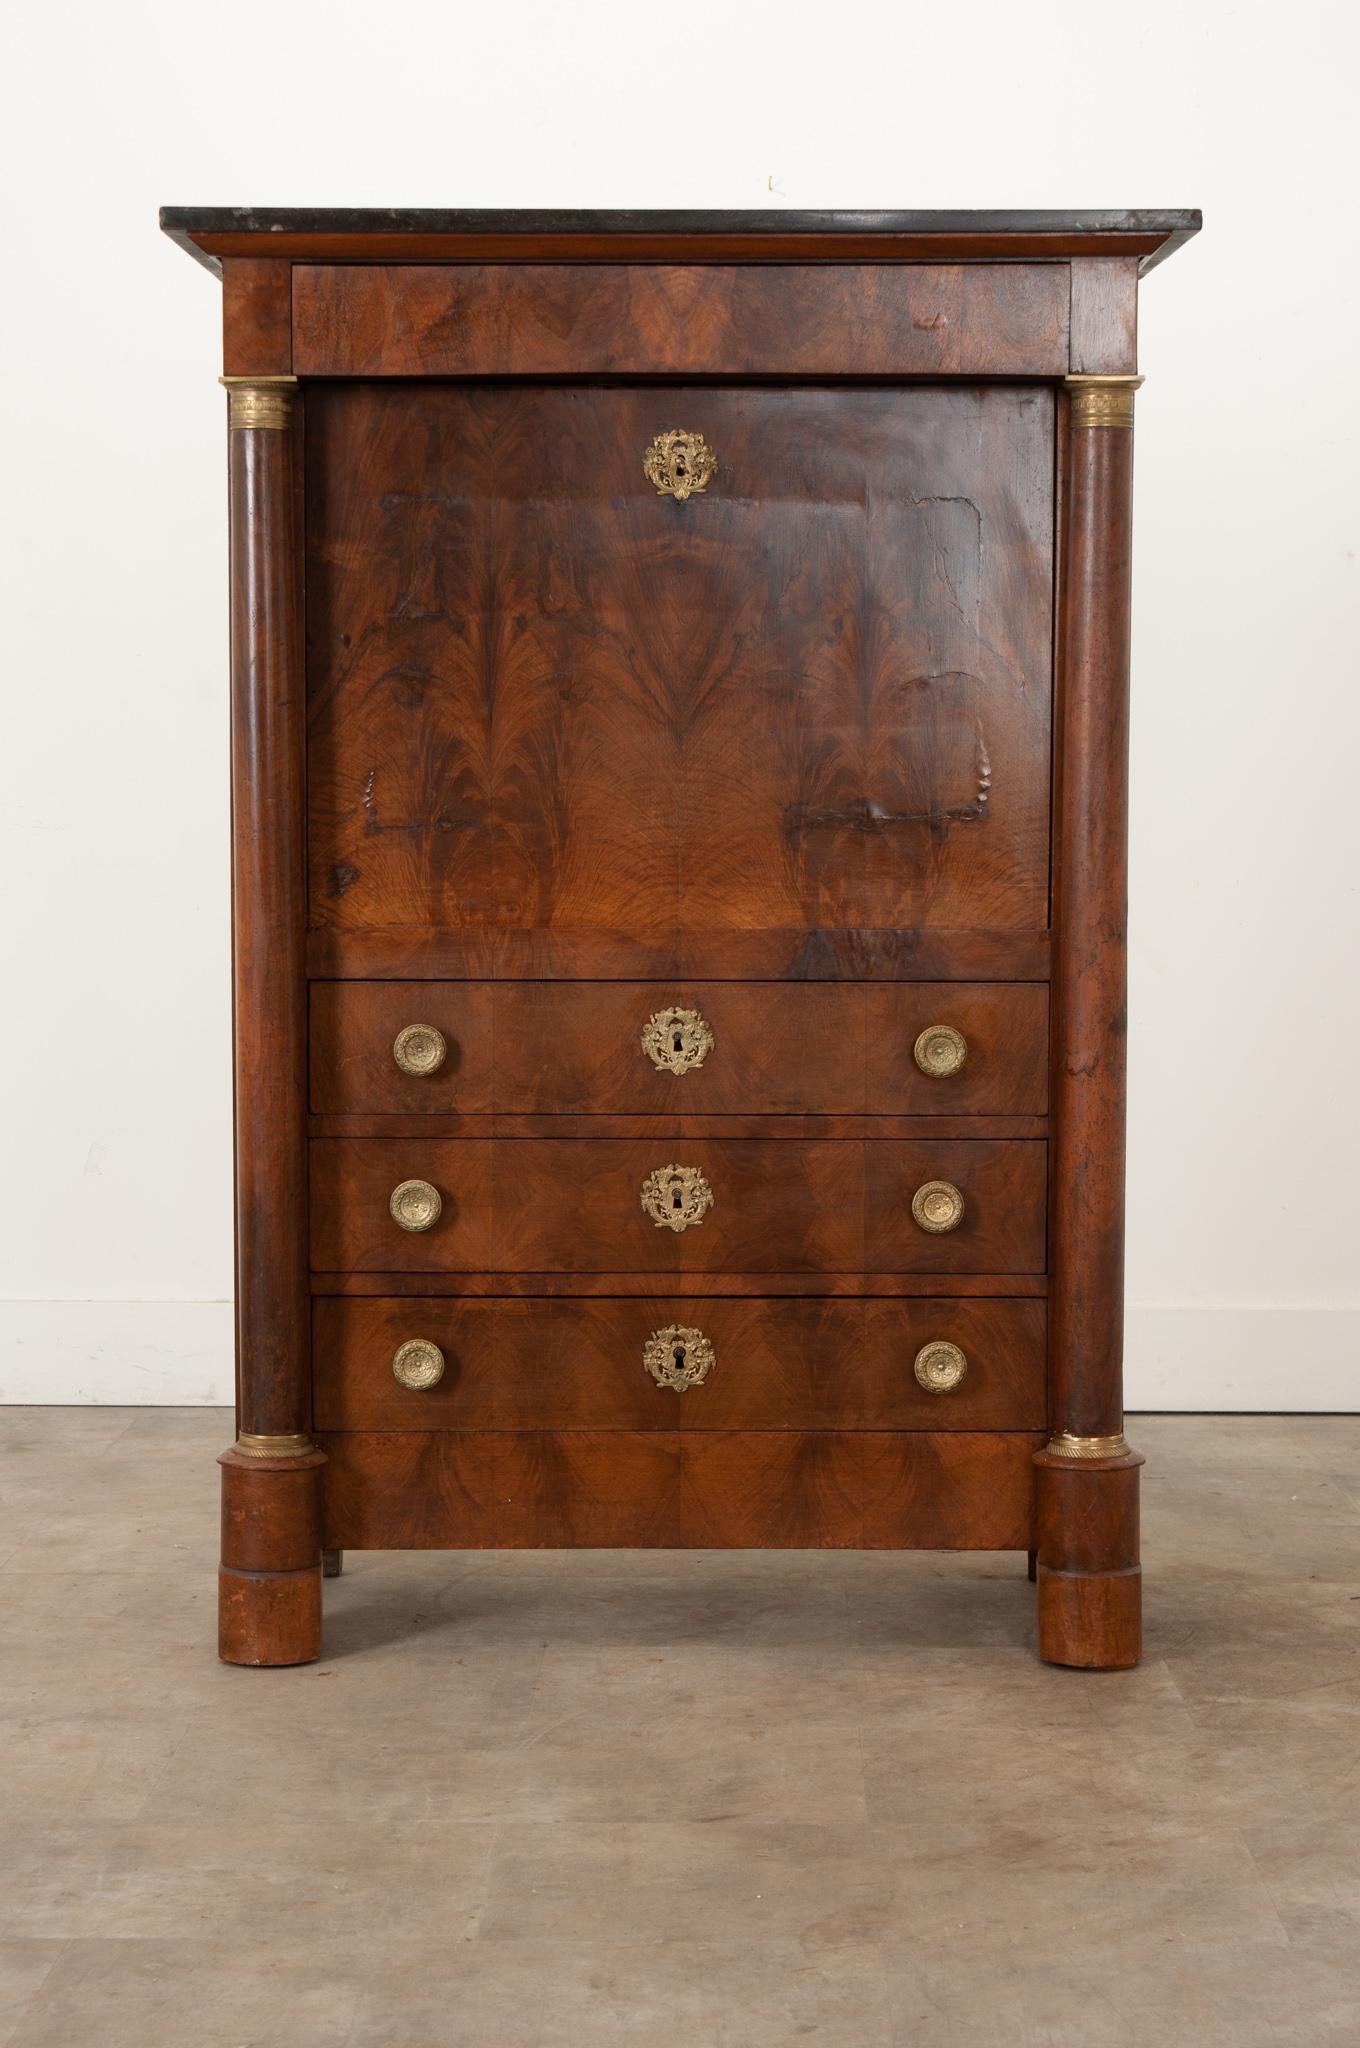 A handsome 19th century Empire secrétaire à abattant made of rich bookmatched and figured walnut. This desk has a black fossil marble top resting above a drawer, accessible with a hidden pull. Below is a fold front door revealing a fitted interior